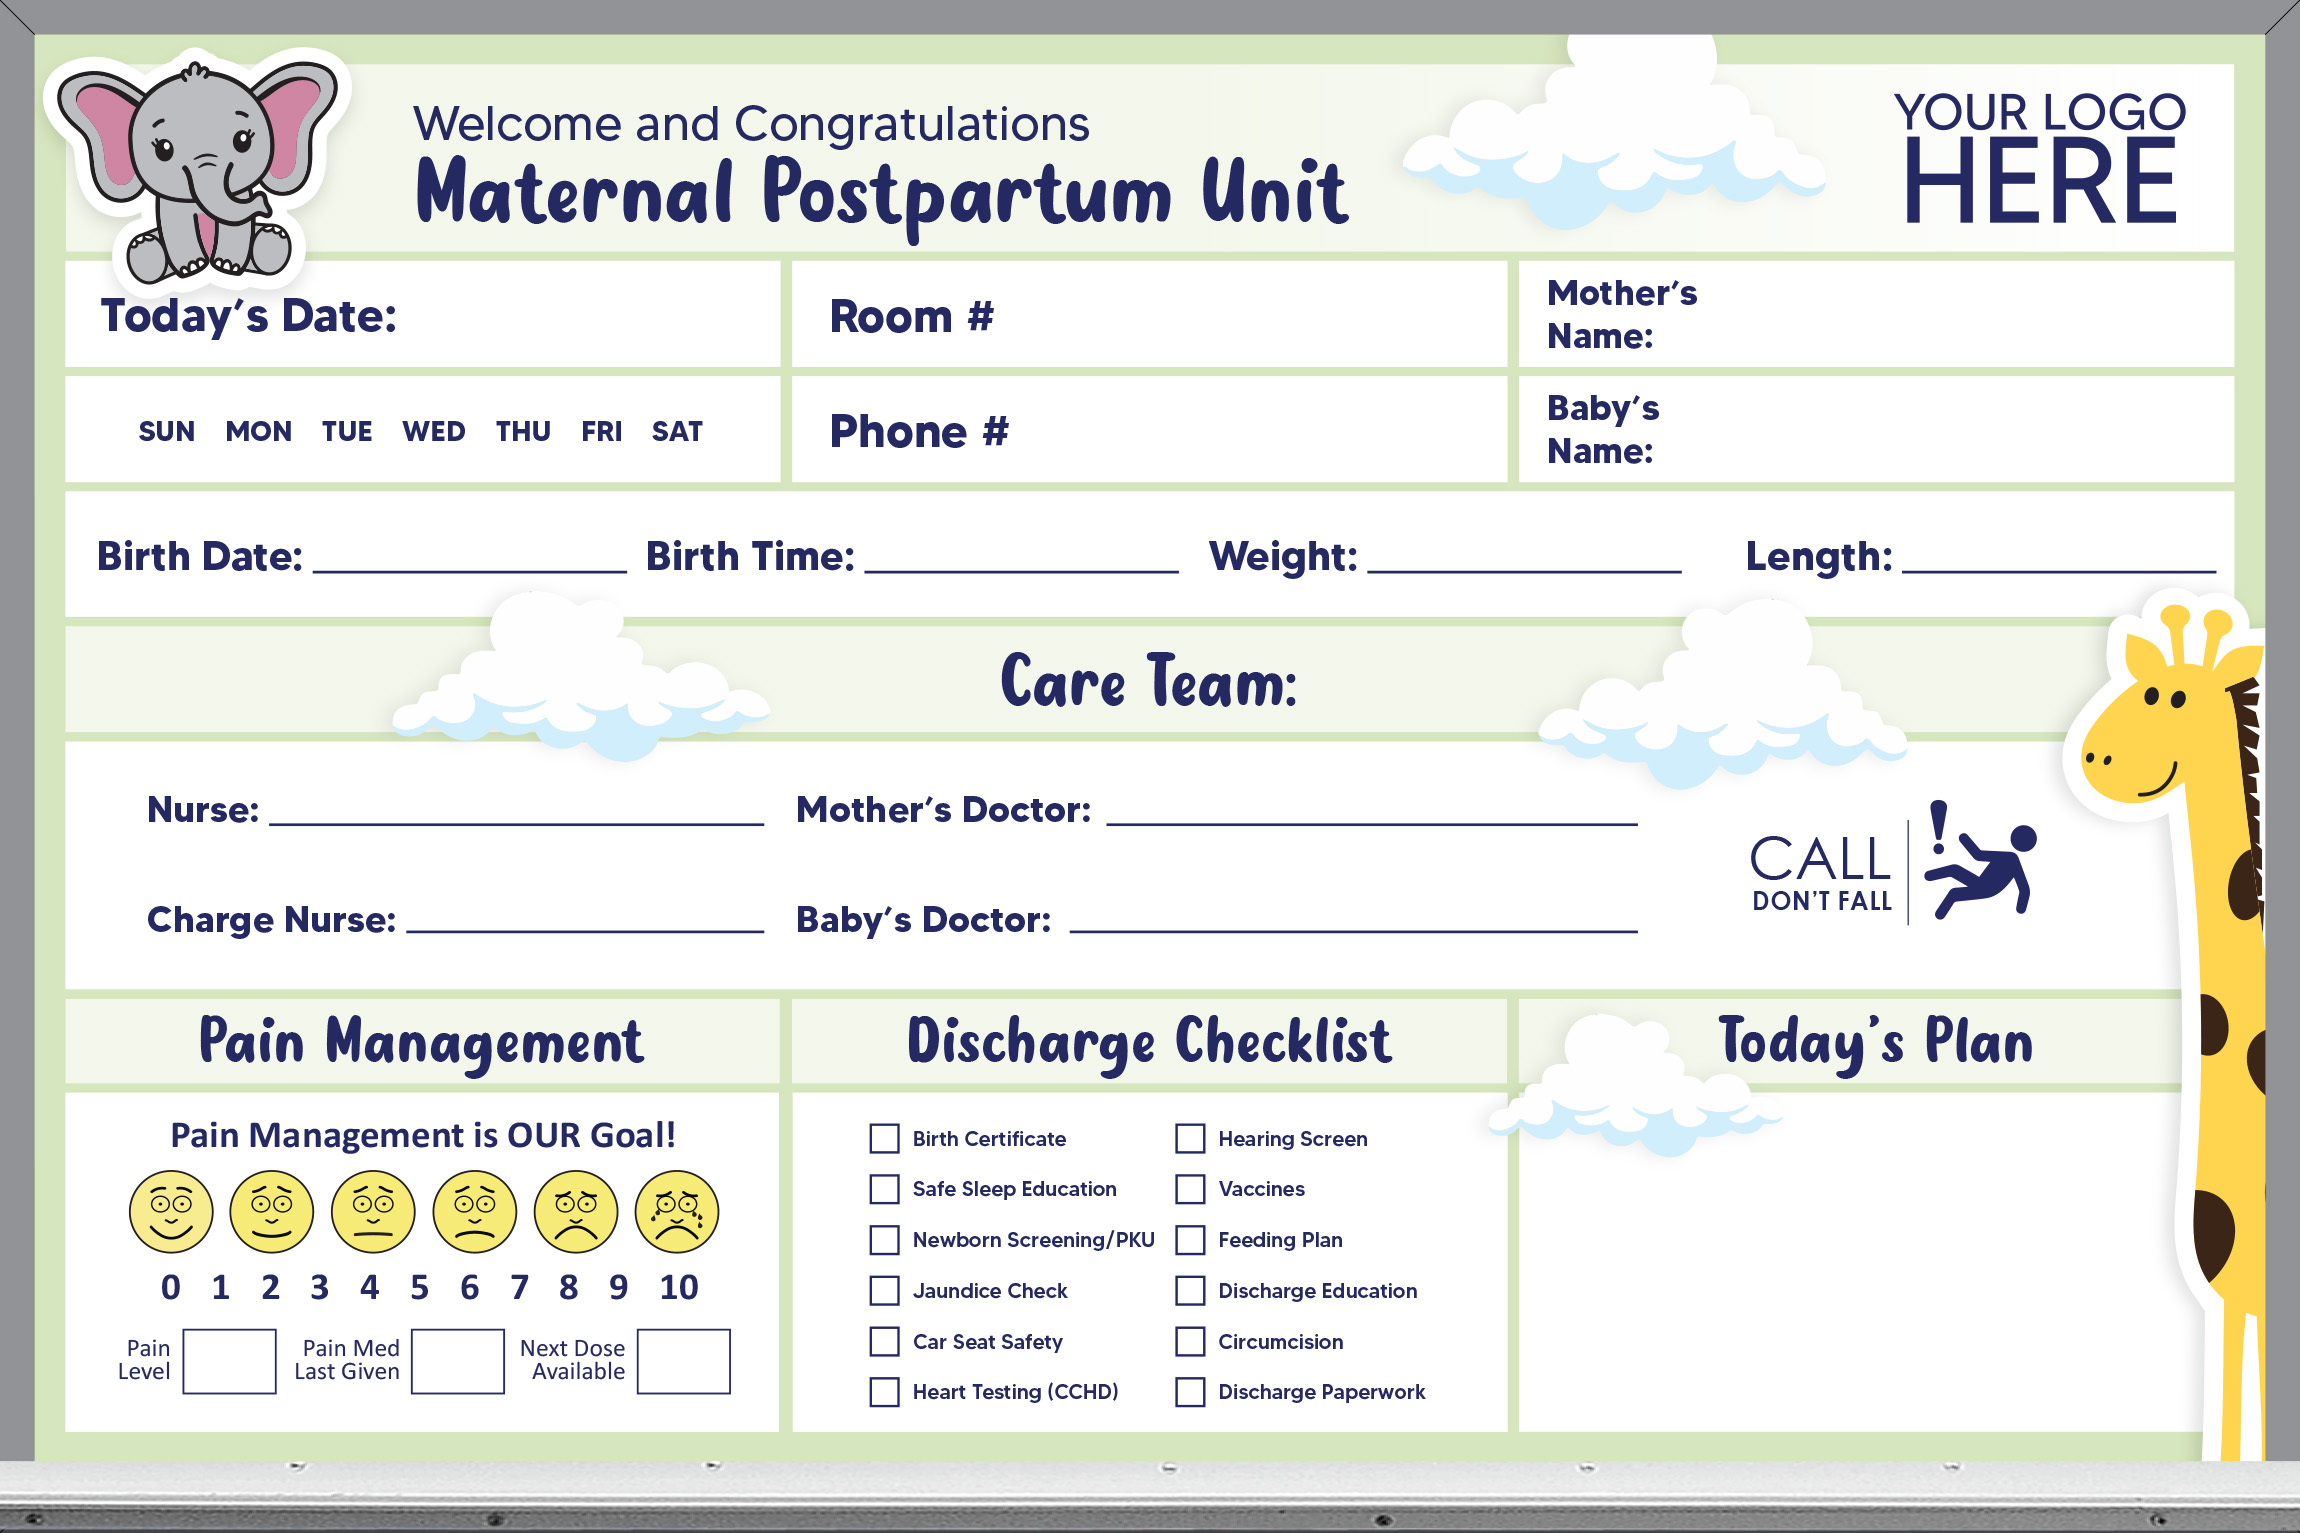 2x3 maternity room whiteboard - pre-printed, green background, add your logo